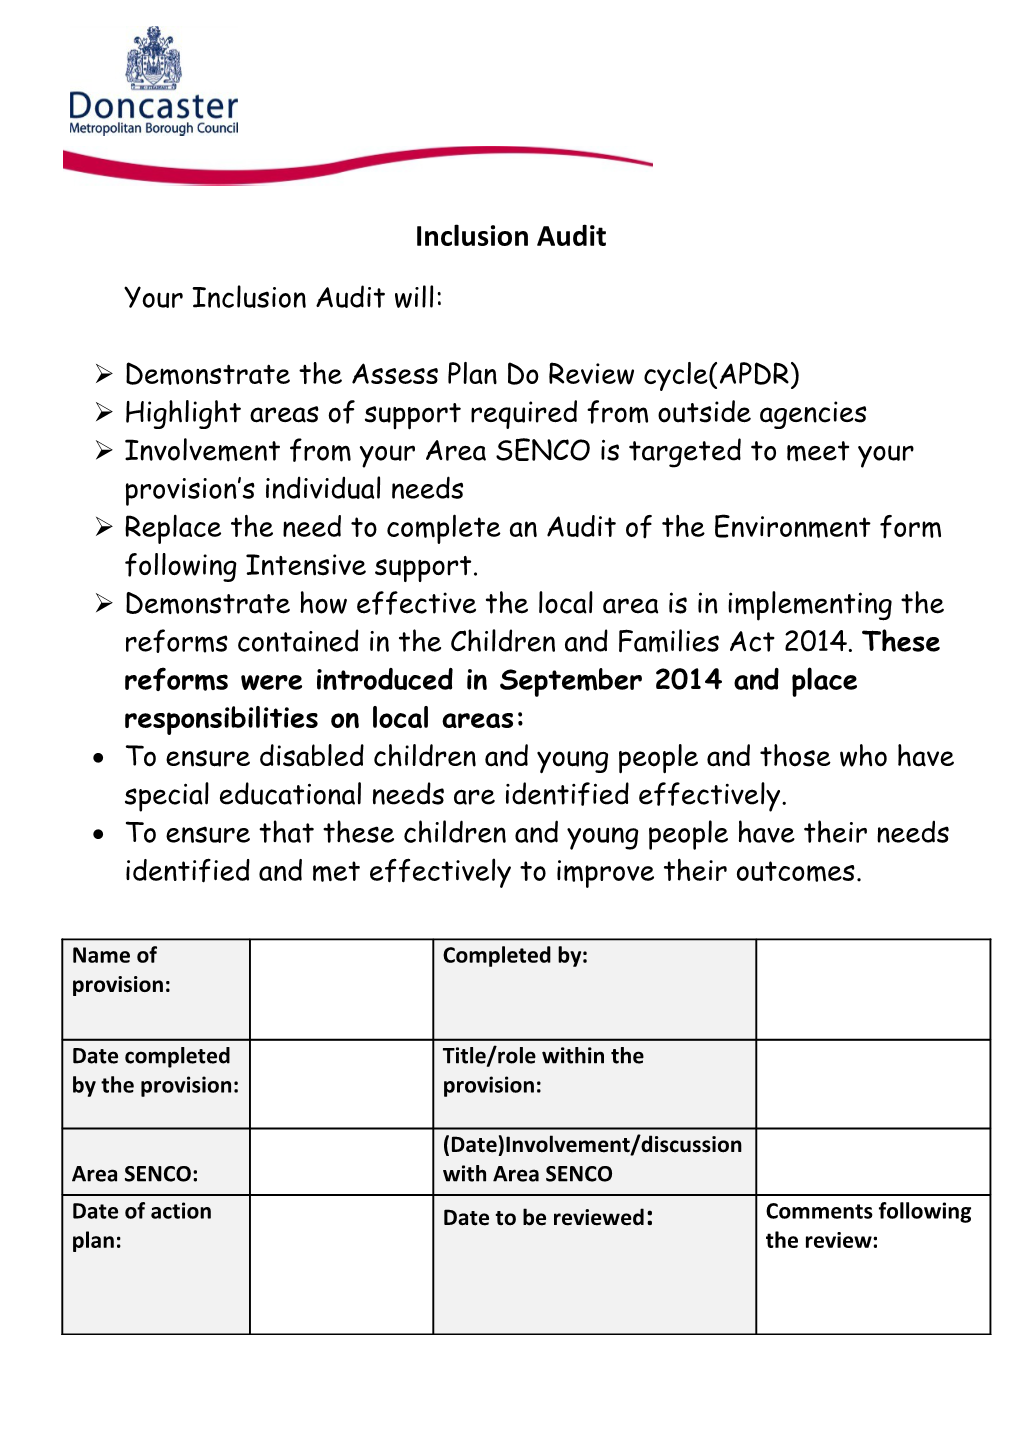 Inclusion Audit Tool